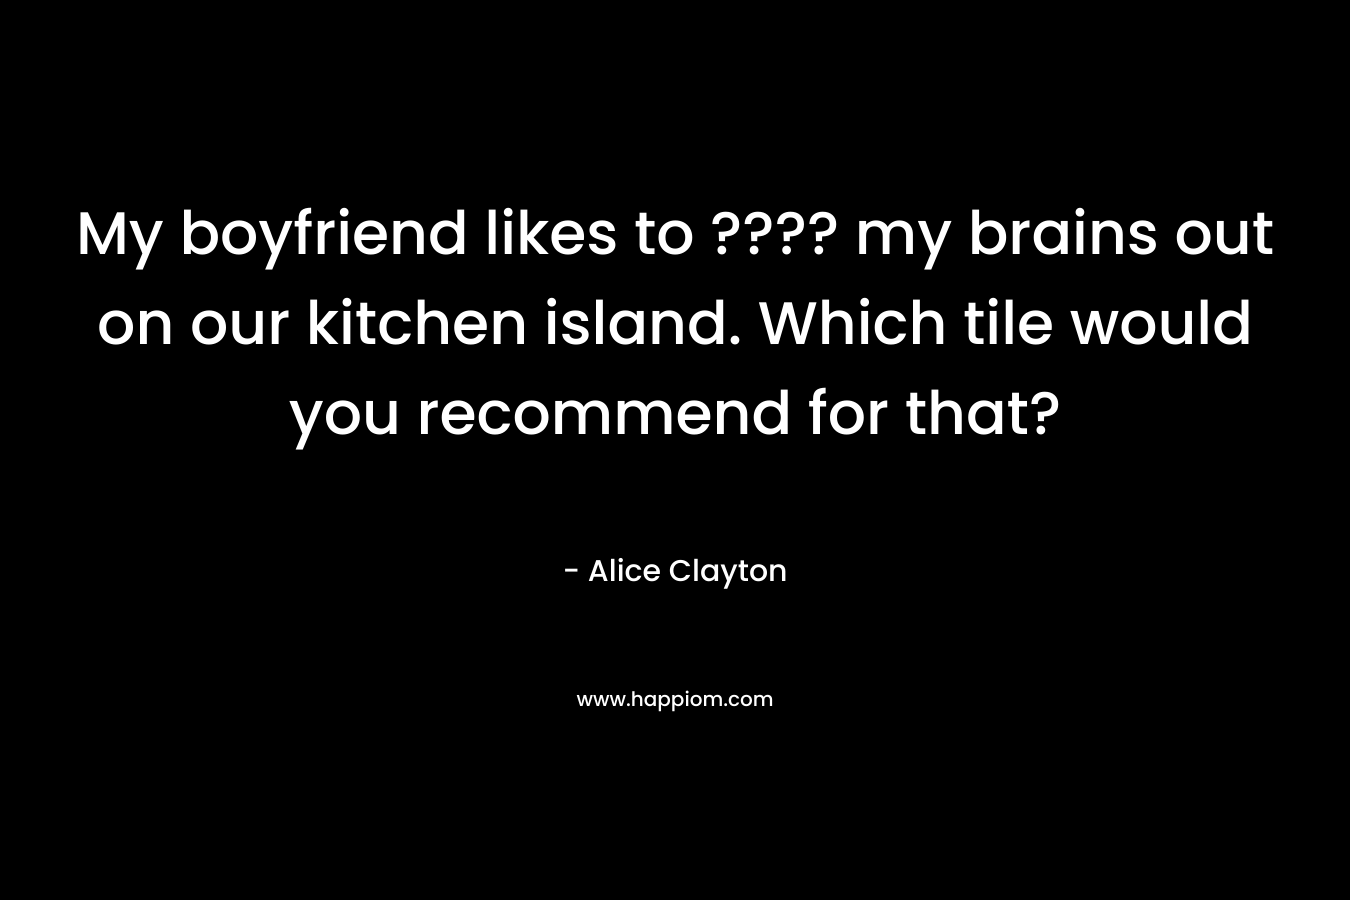 My boyfriend likes to ???? my brains out on our kitchen island. Which tile would you recommend for that?